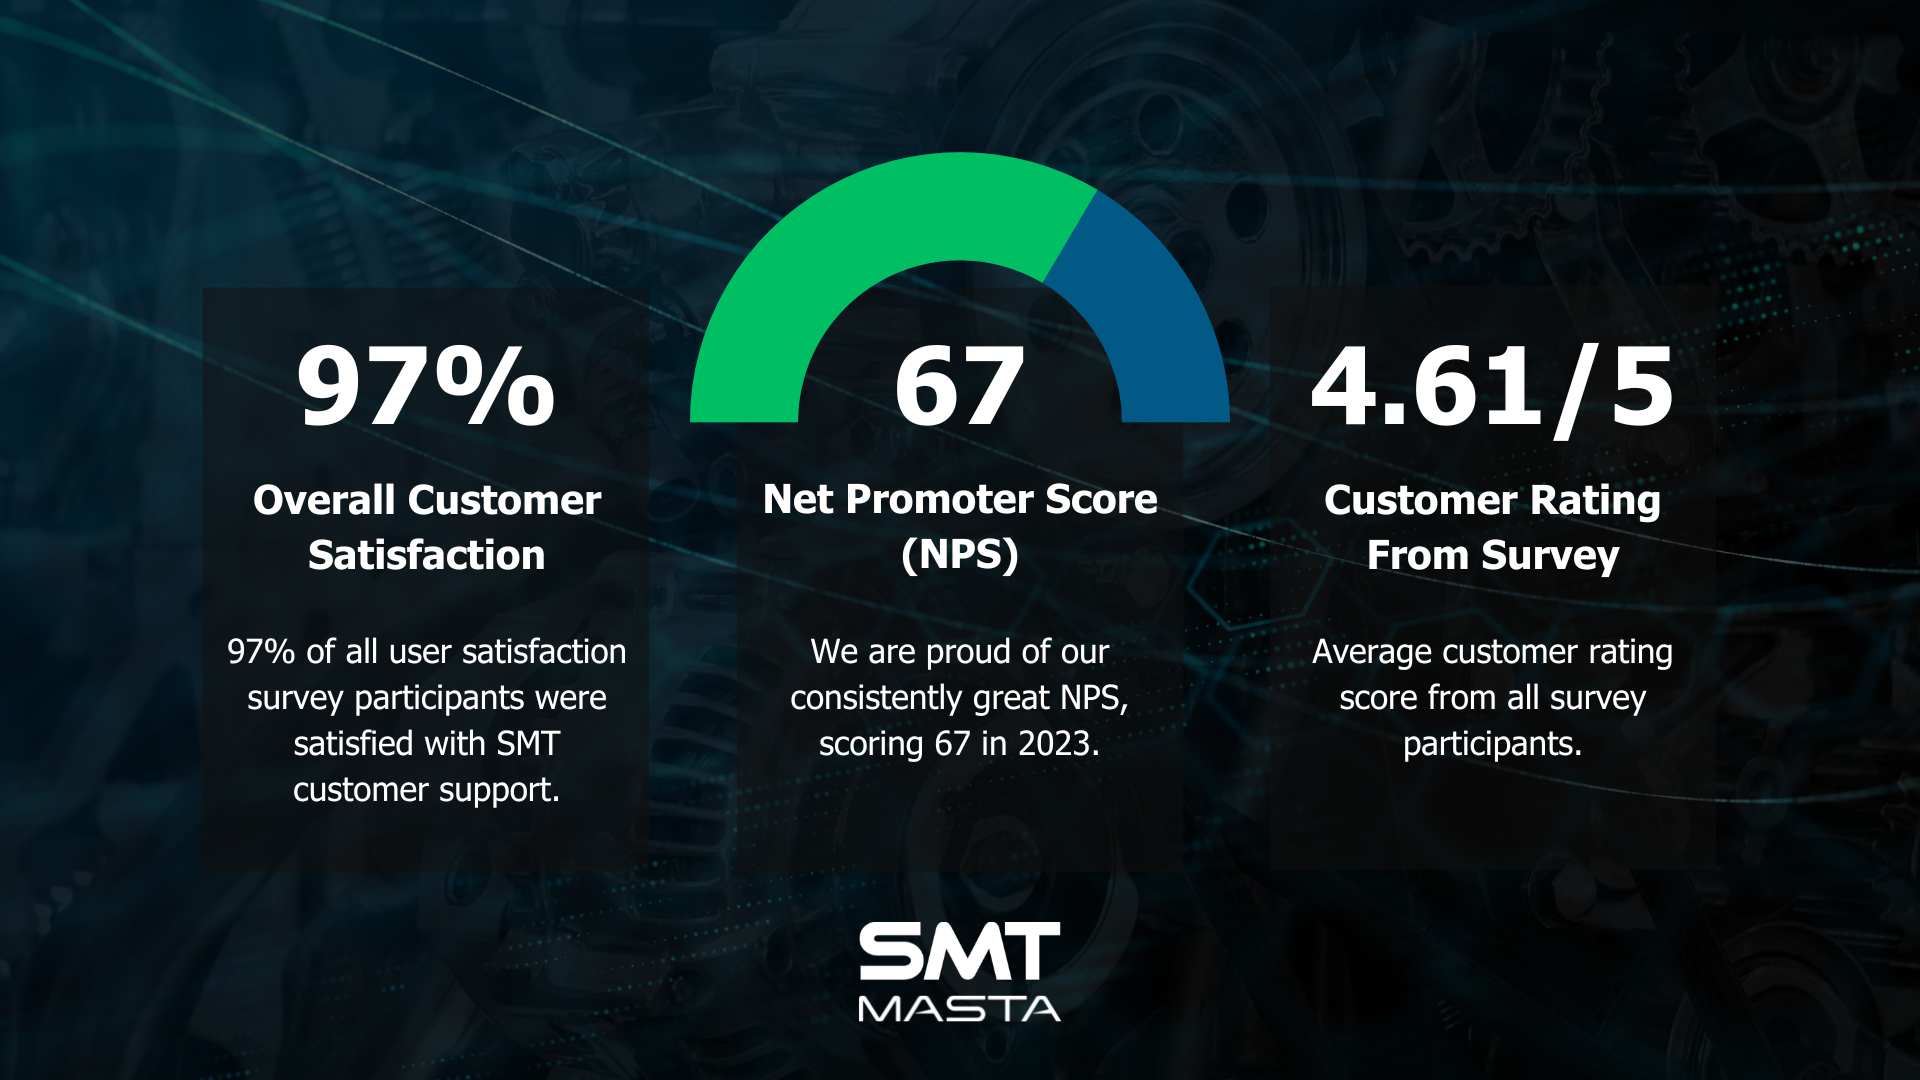 Key statistics from the SMT Customer Support Report 2023.